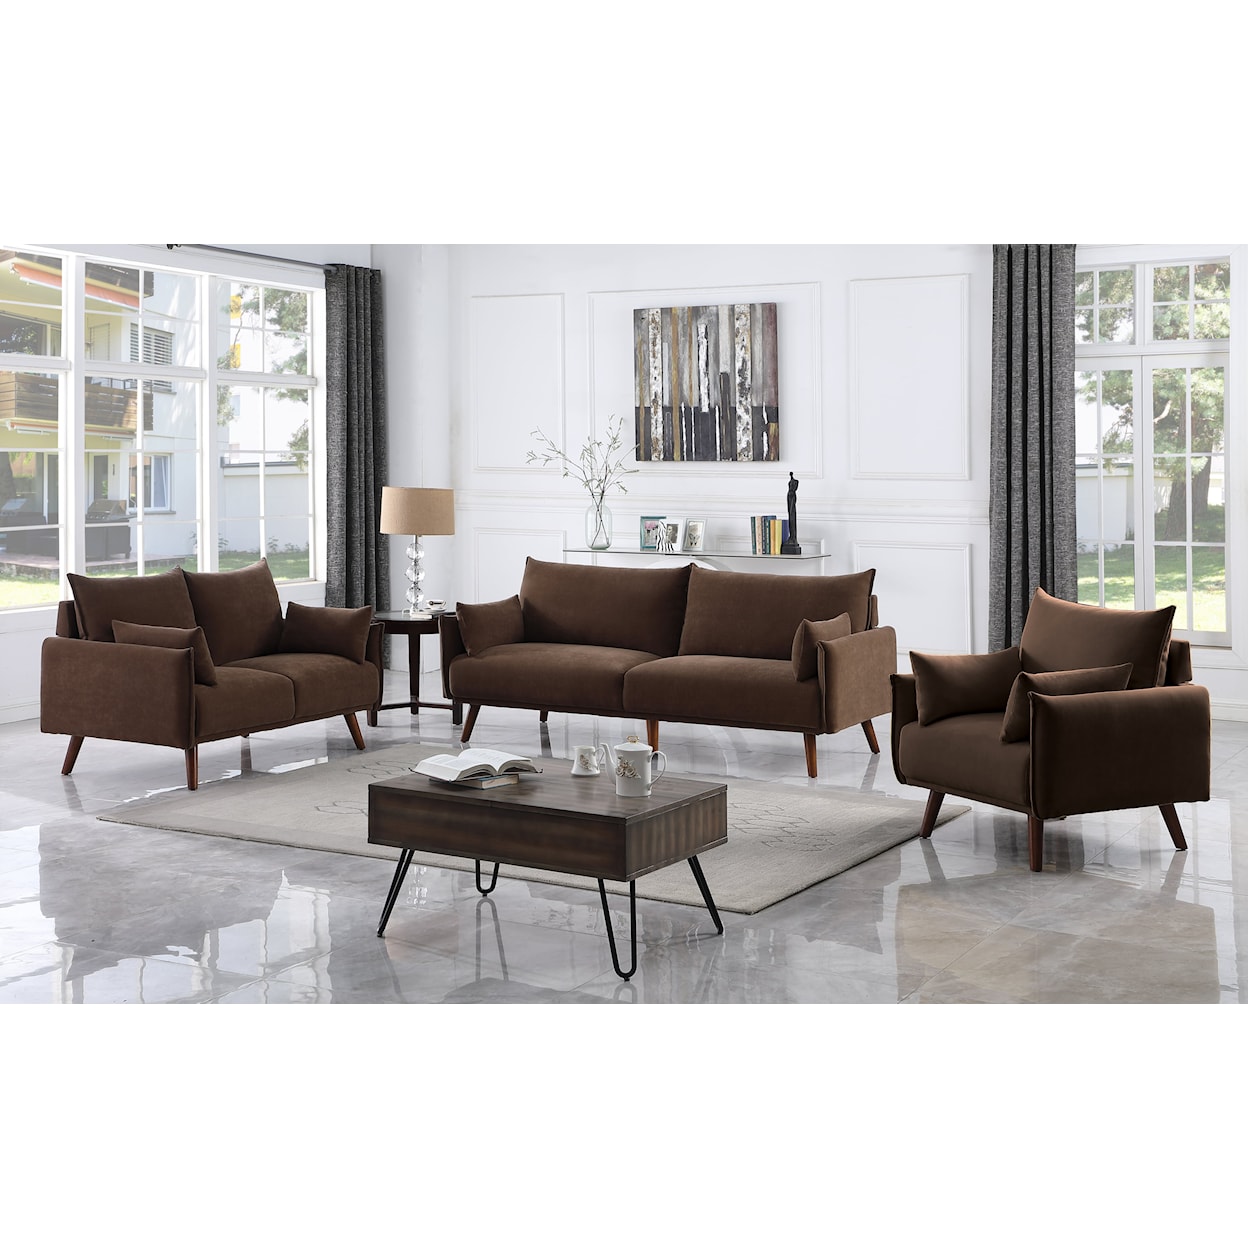 New Classic Furniture Reeves Living Room Set